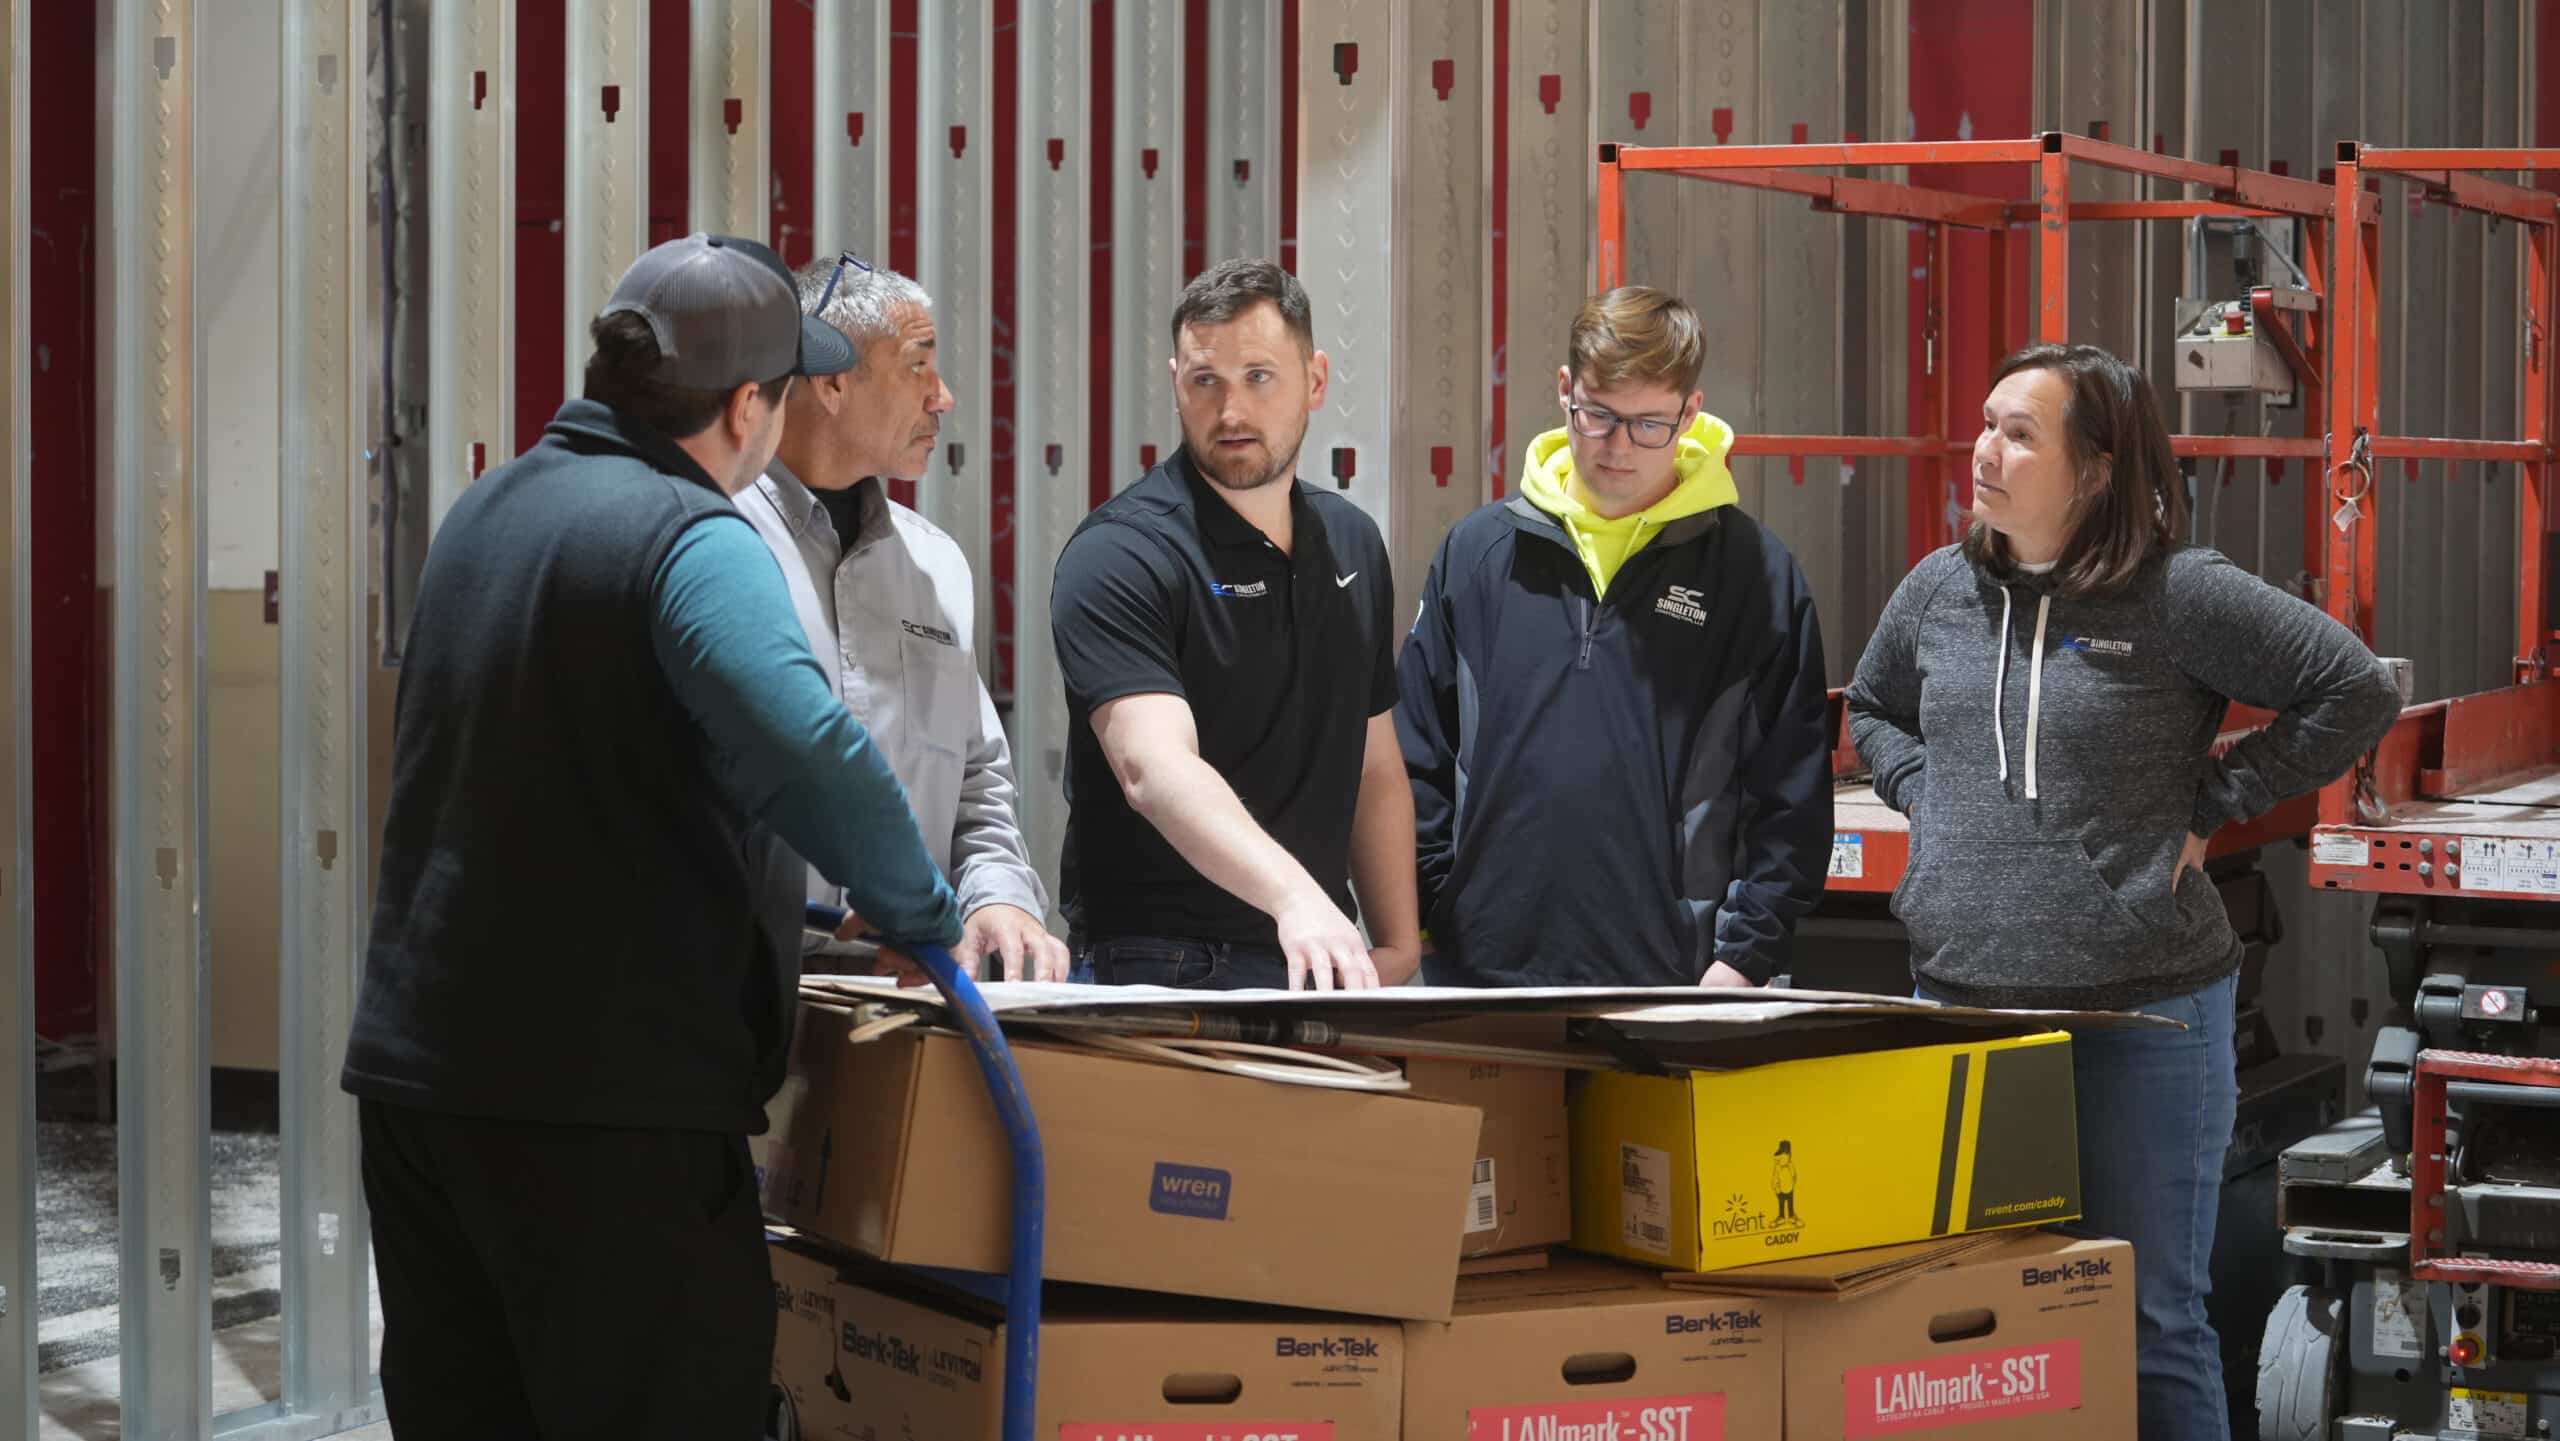 A group of people standing around boxes in a warehouse.